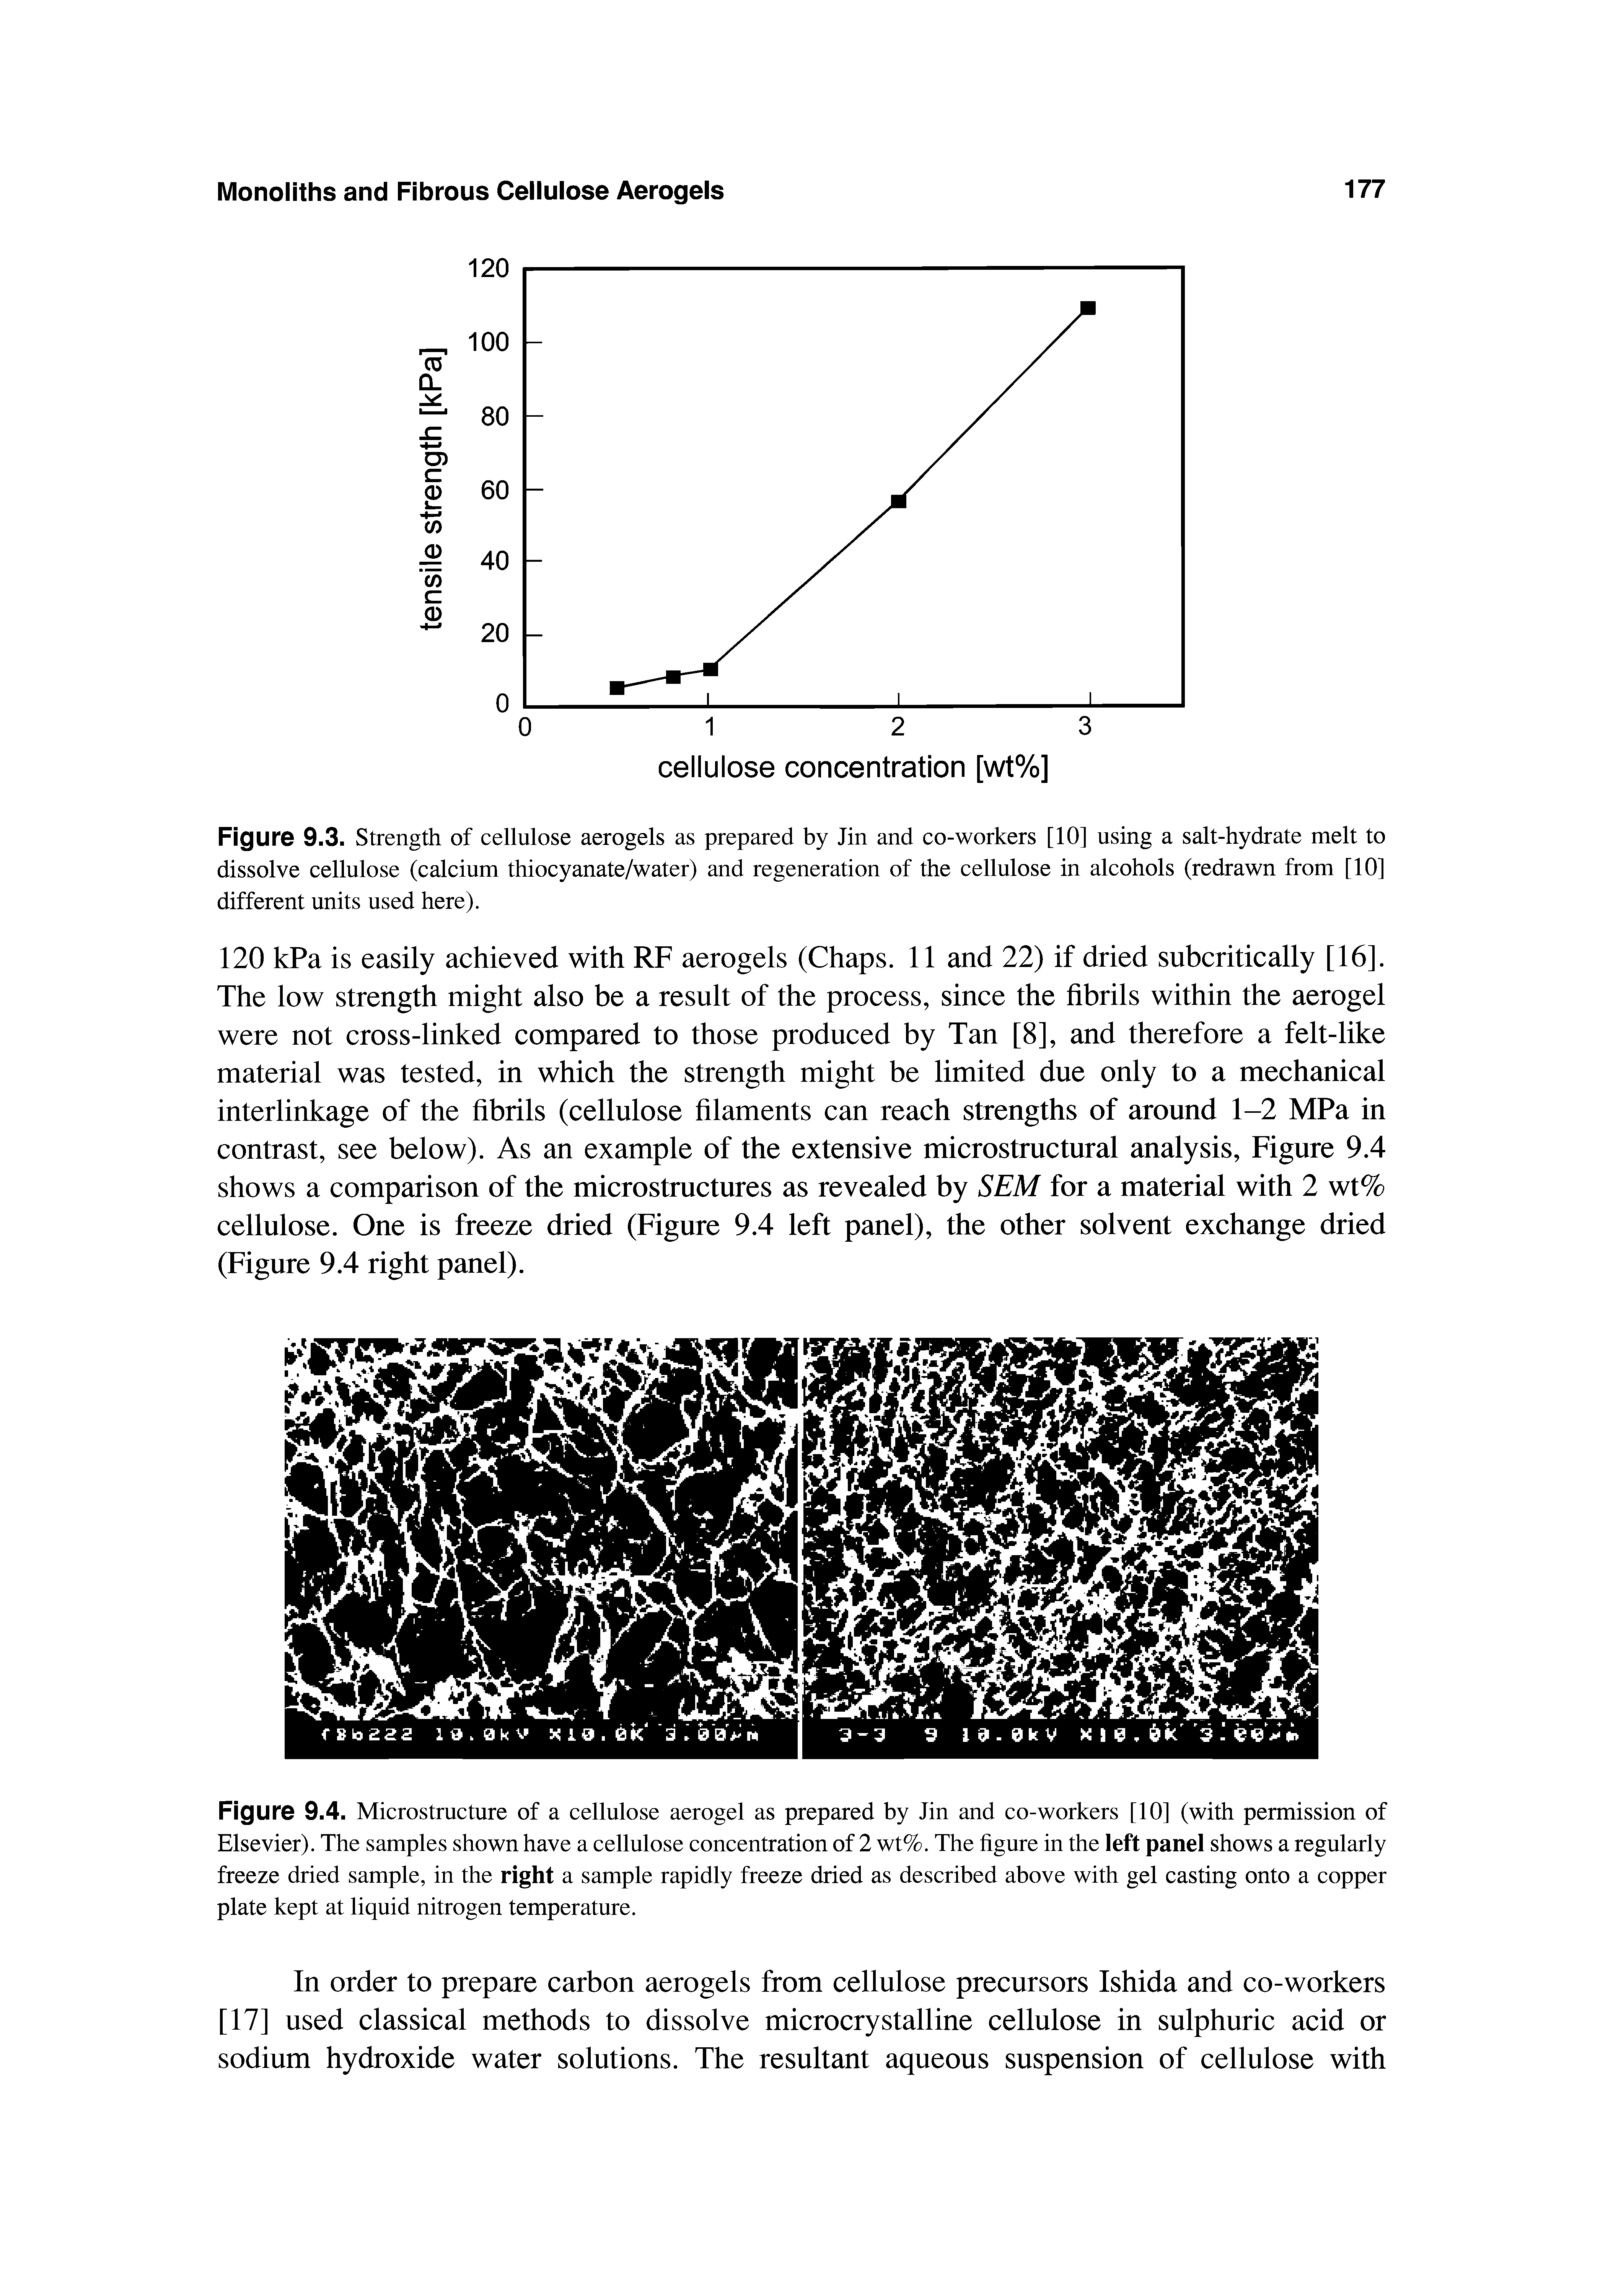 Figure 9.4. Microstructure of a cellulose aerogel as prepared by Jin and co-workers [10] (with permission of Elsevier). The samples shown have a cellulose concentration of 2 wt%. The figure in the left panel shows a regularly freeze dried sample, in the right a sample rapidly freeze dried as described above with gel casting onto a copper plate kept at liquid nitrogen temperature.